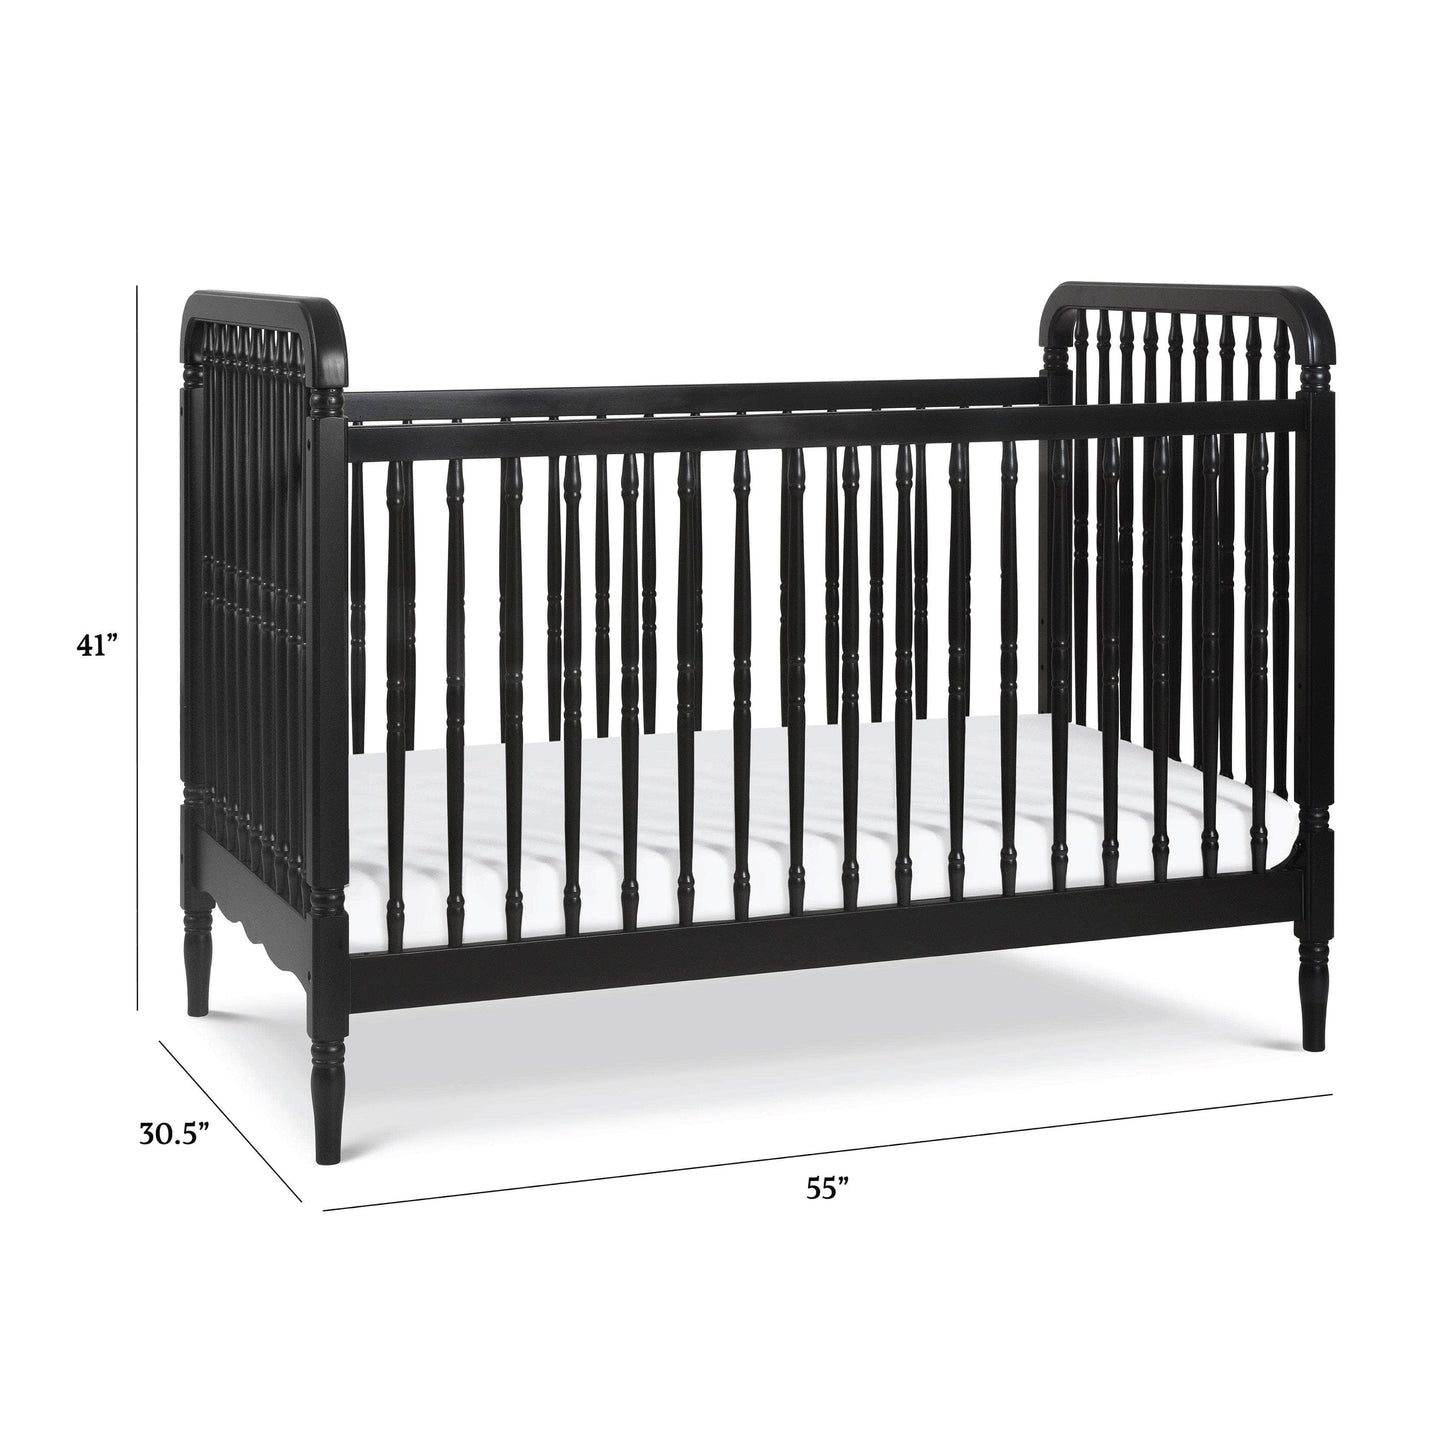 M7101B,Liberty 3-in-1 Convertible Spindle Crib w/Toddler Bed Conversion Kit in Black